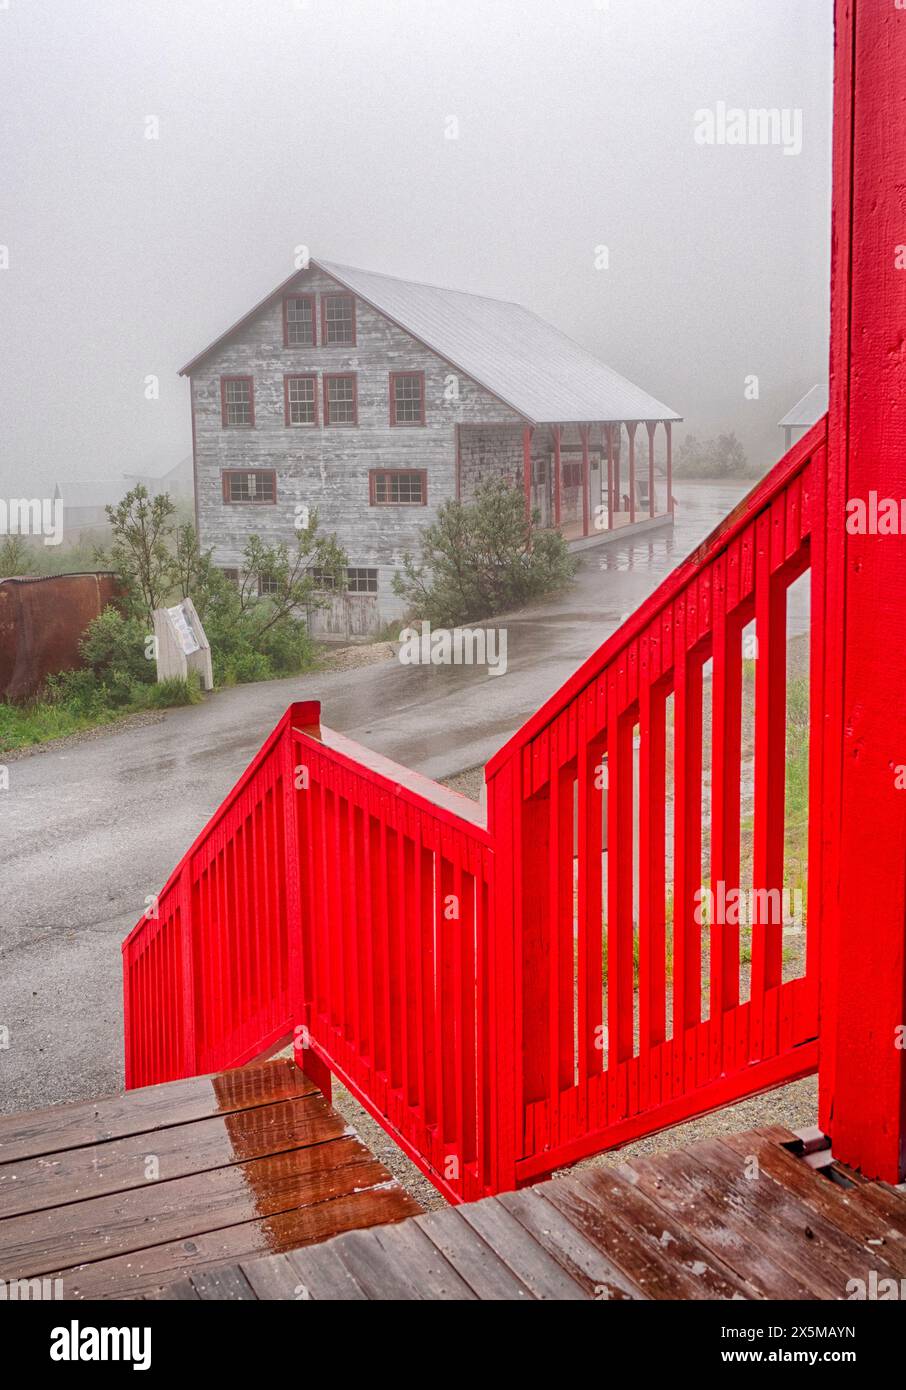 USA, Alaska. Bright red porch railing and the No.1 bunkhouse at the Independence Mine State Historical Park listed on the National Register of Histori Stock Photo